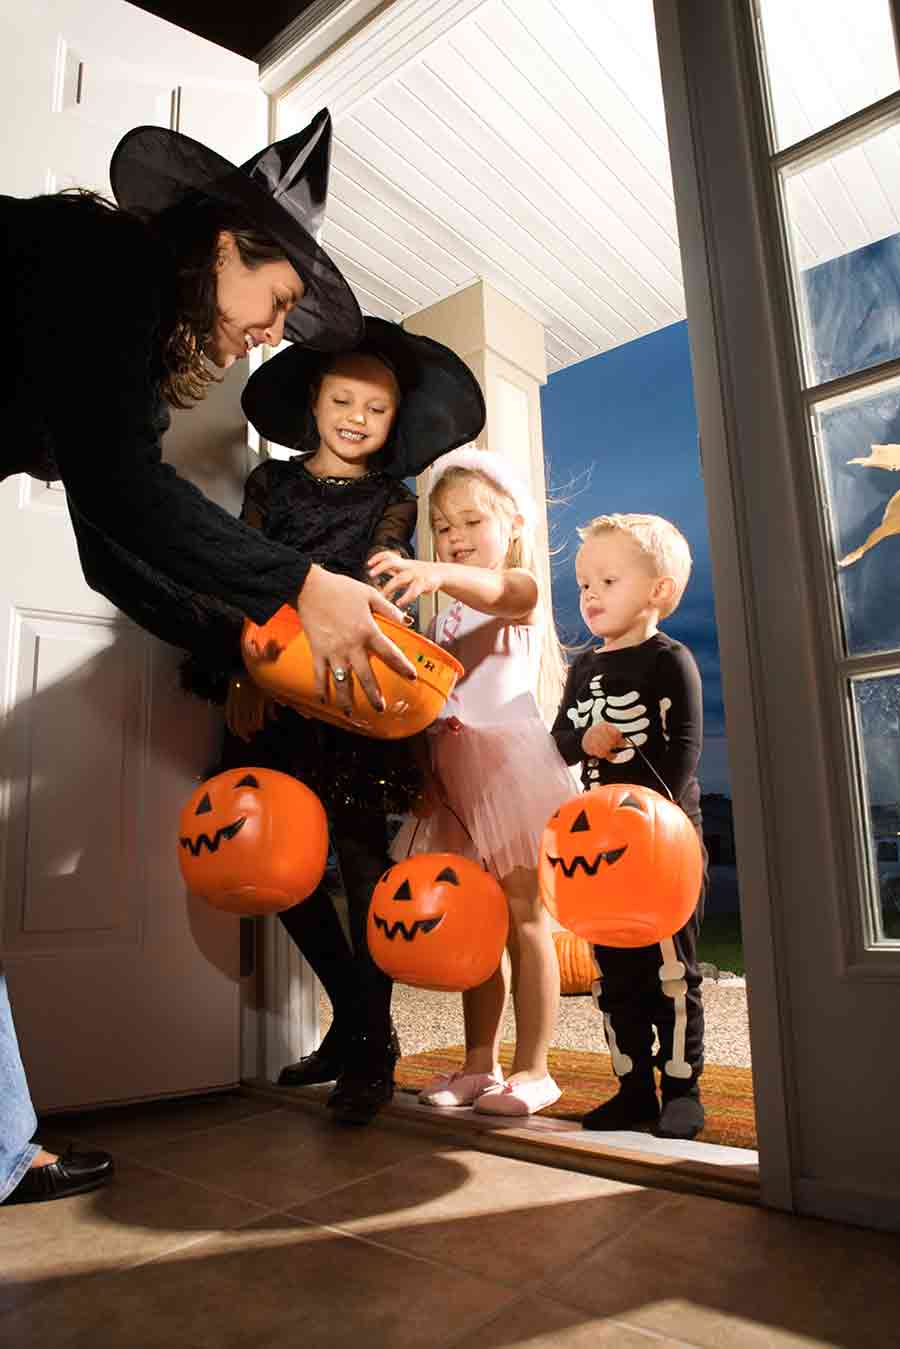 7 Tips to Stay Safe This Halloween While Trick-or-Treating - LiveHealth